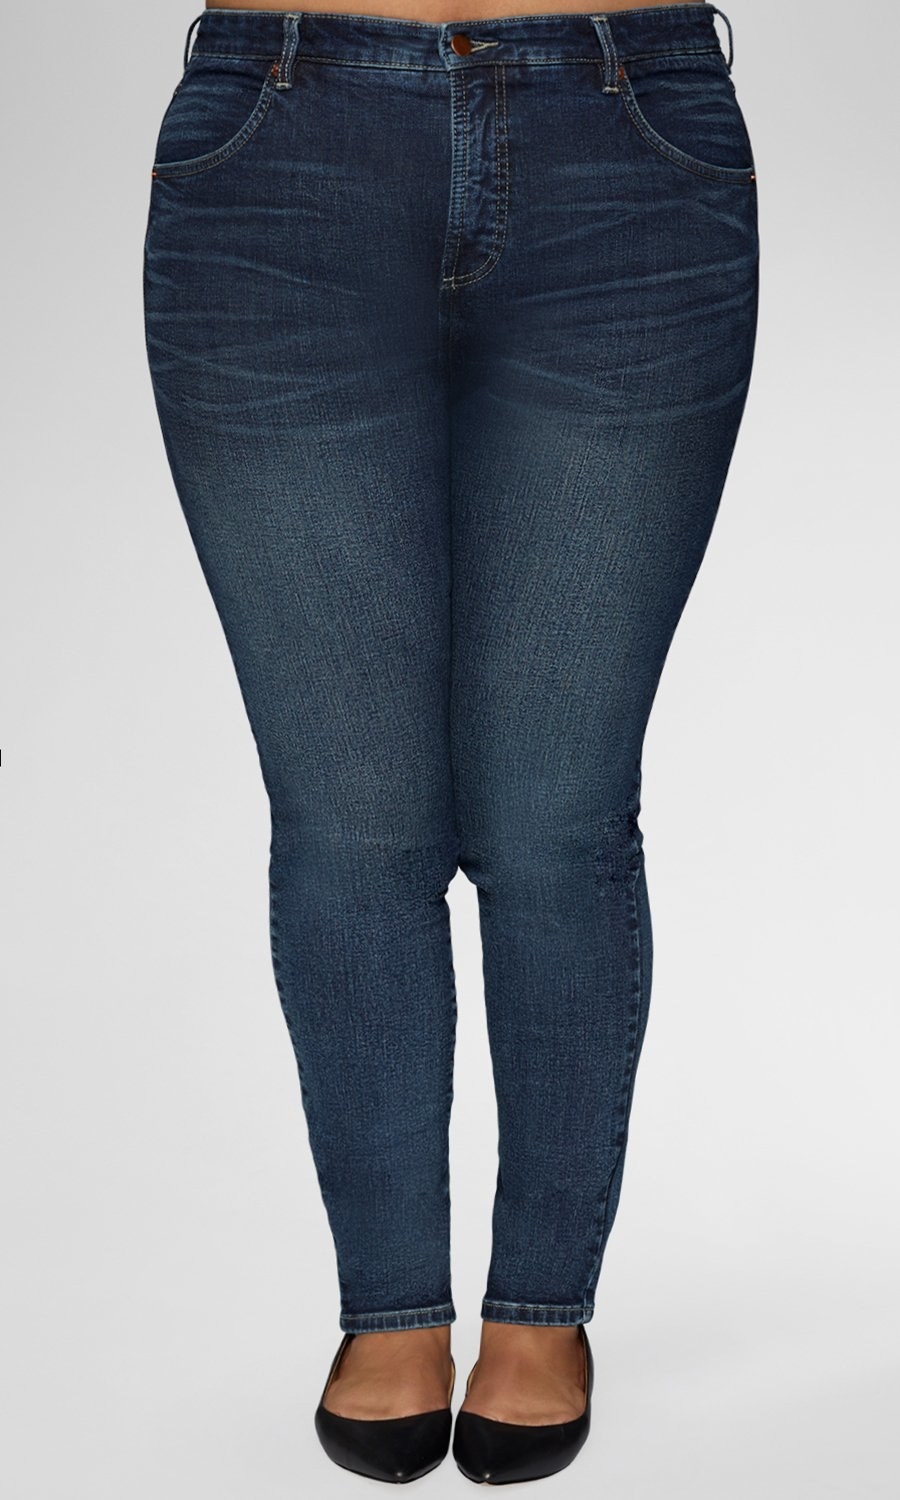 best place to buy jeans for plus size